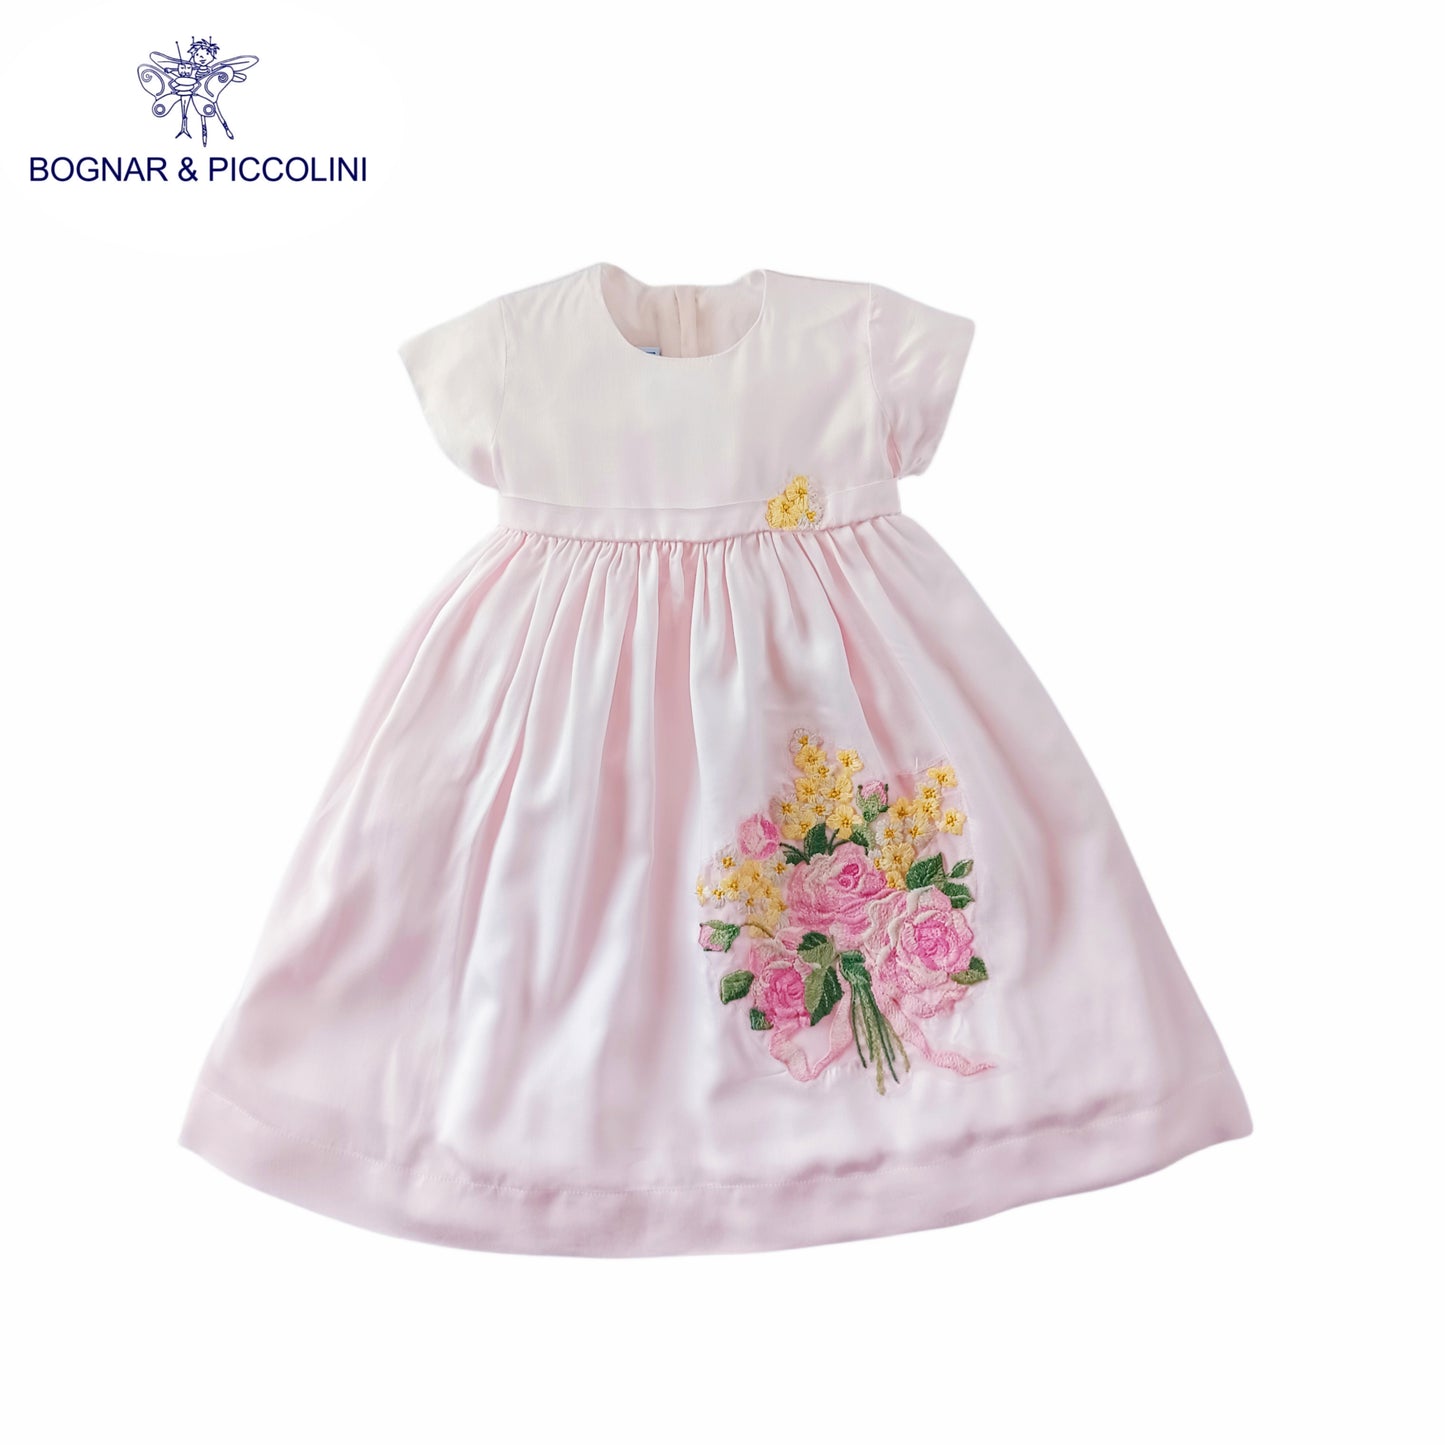 Girl's Dress with Flower Bouquet